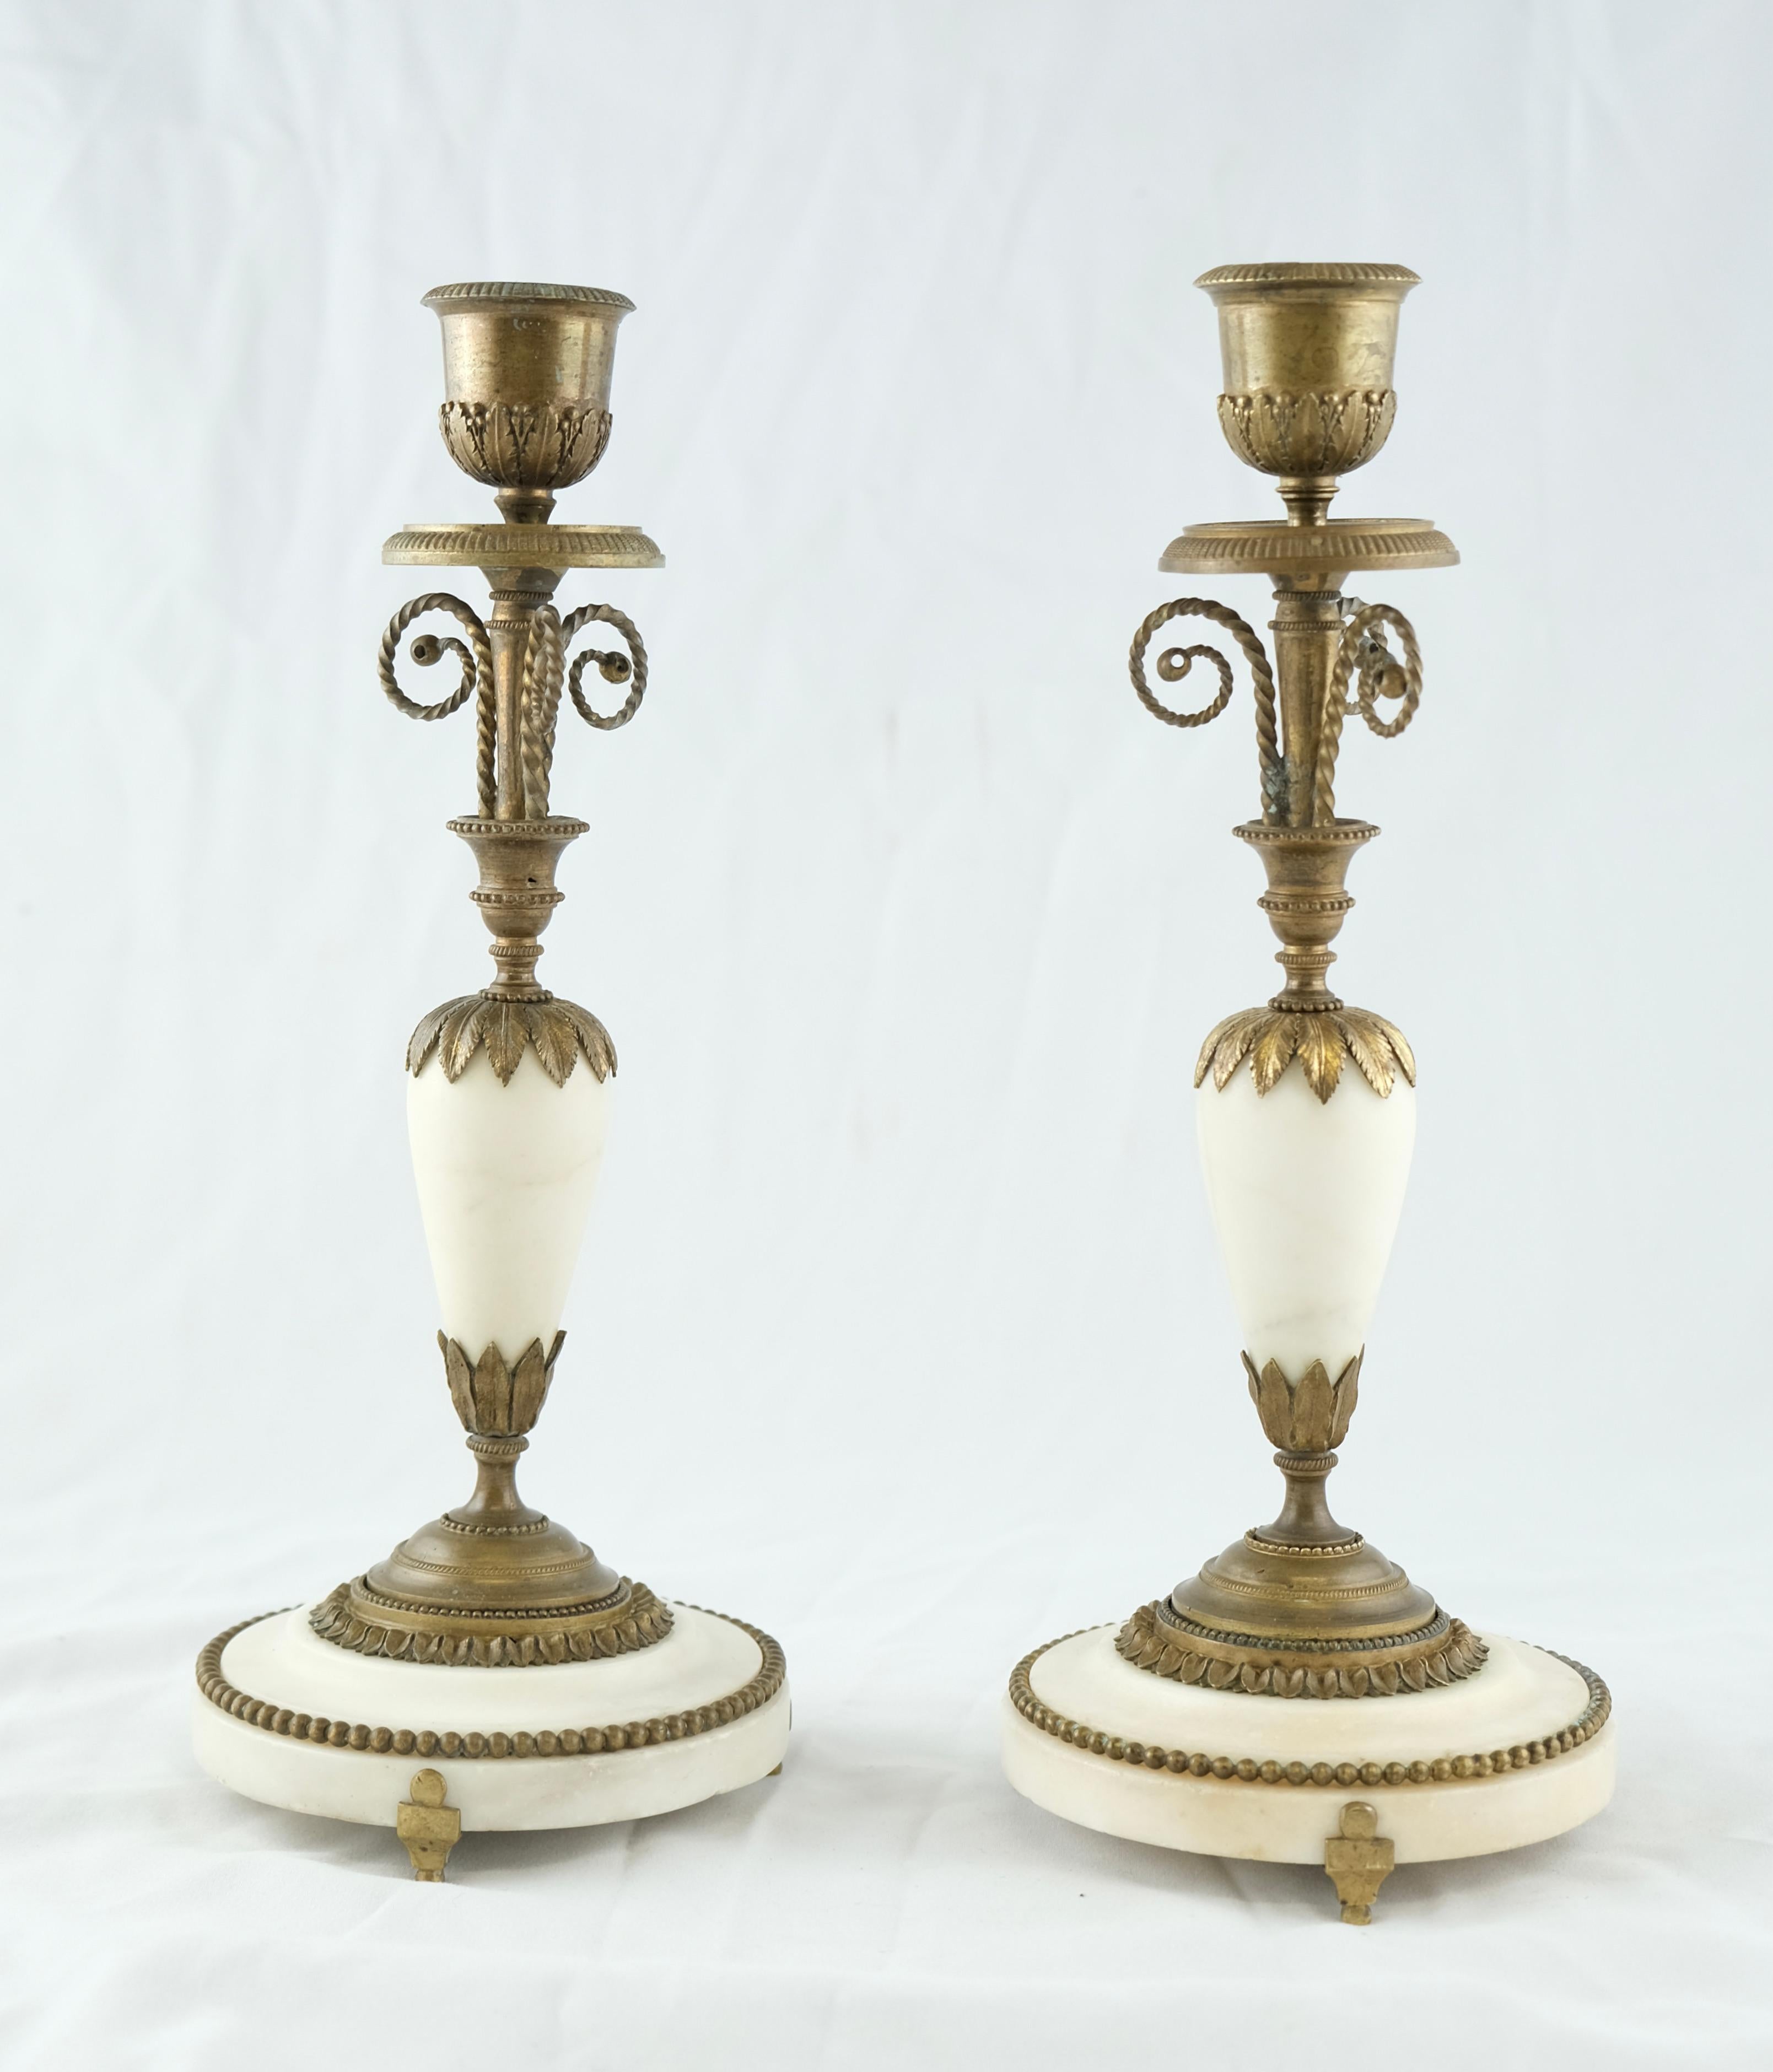 A pair of French candlesticks in a wonderful condition. White marble mounted with bronze ornaments. The quality of the castings and chiseling is high. the design is romantic and beautiful.